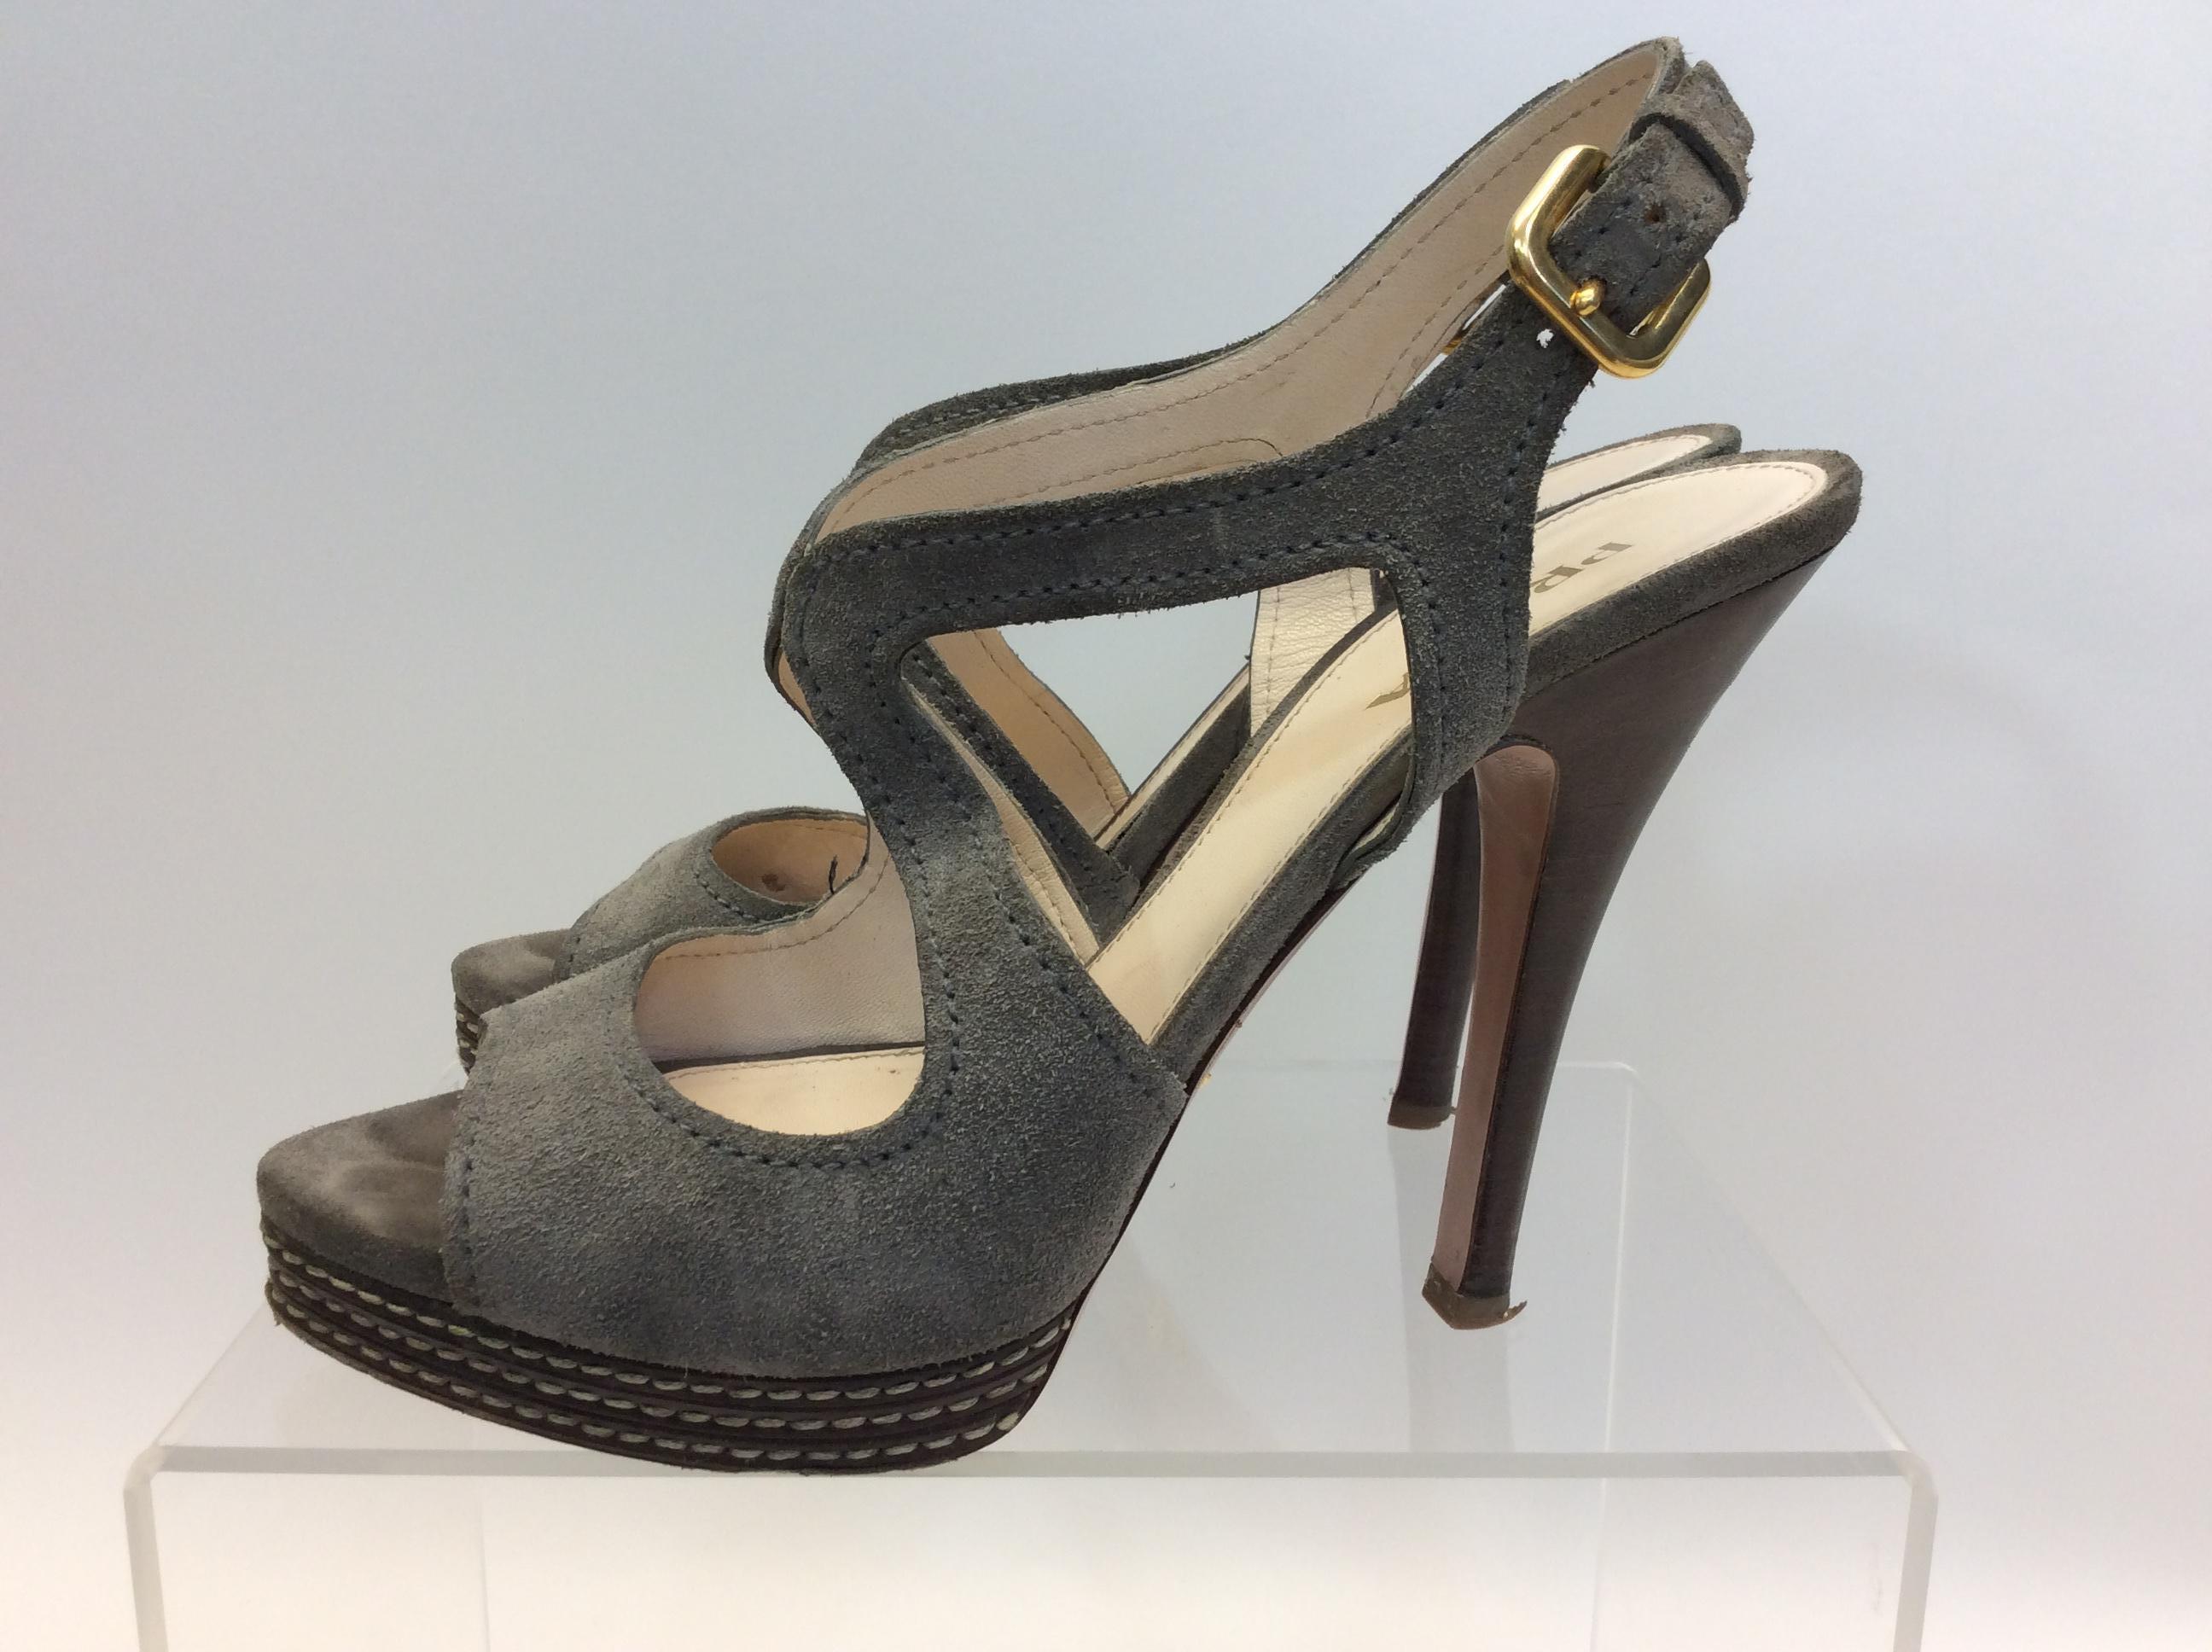 Prada Taupe Suede Heels
$150
Made in Italy
Suede
Size 41
5